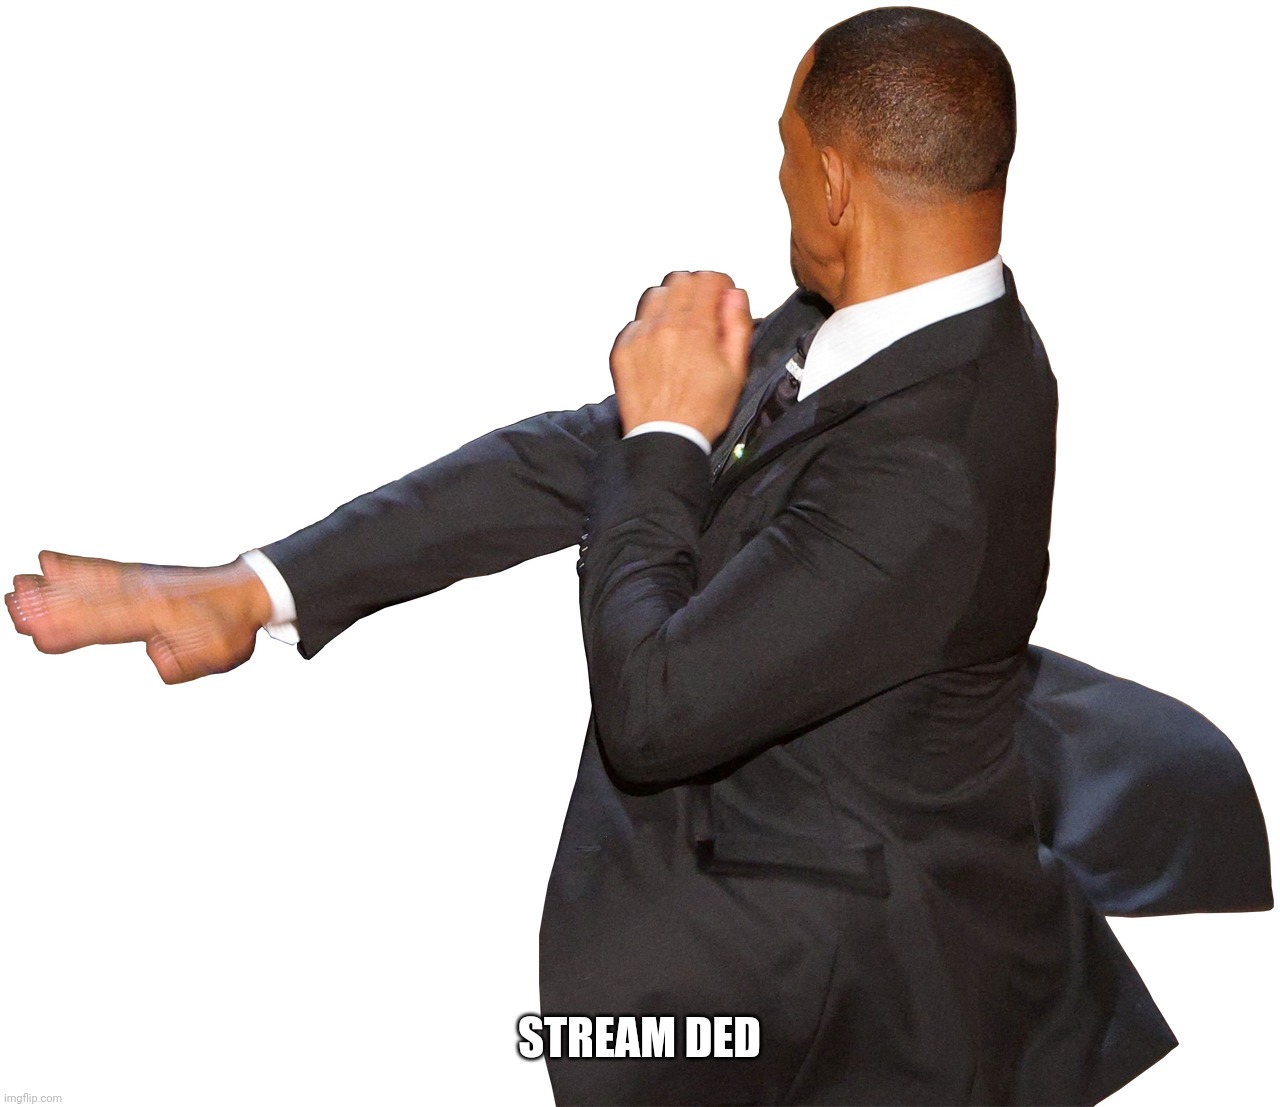 Will Smith slap | STREAM DED | image tagged in will smith slap | made w/ Imgflip meme maker